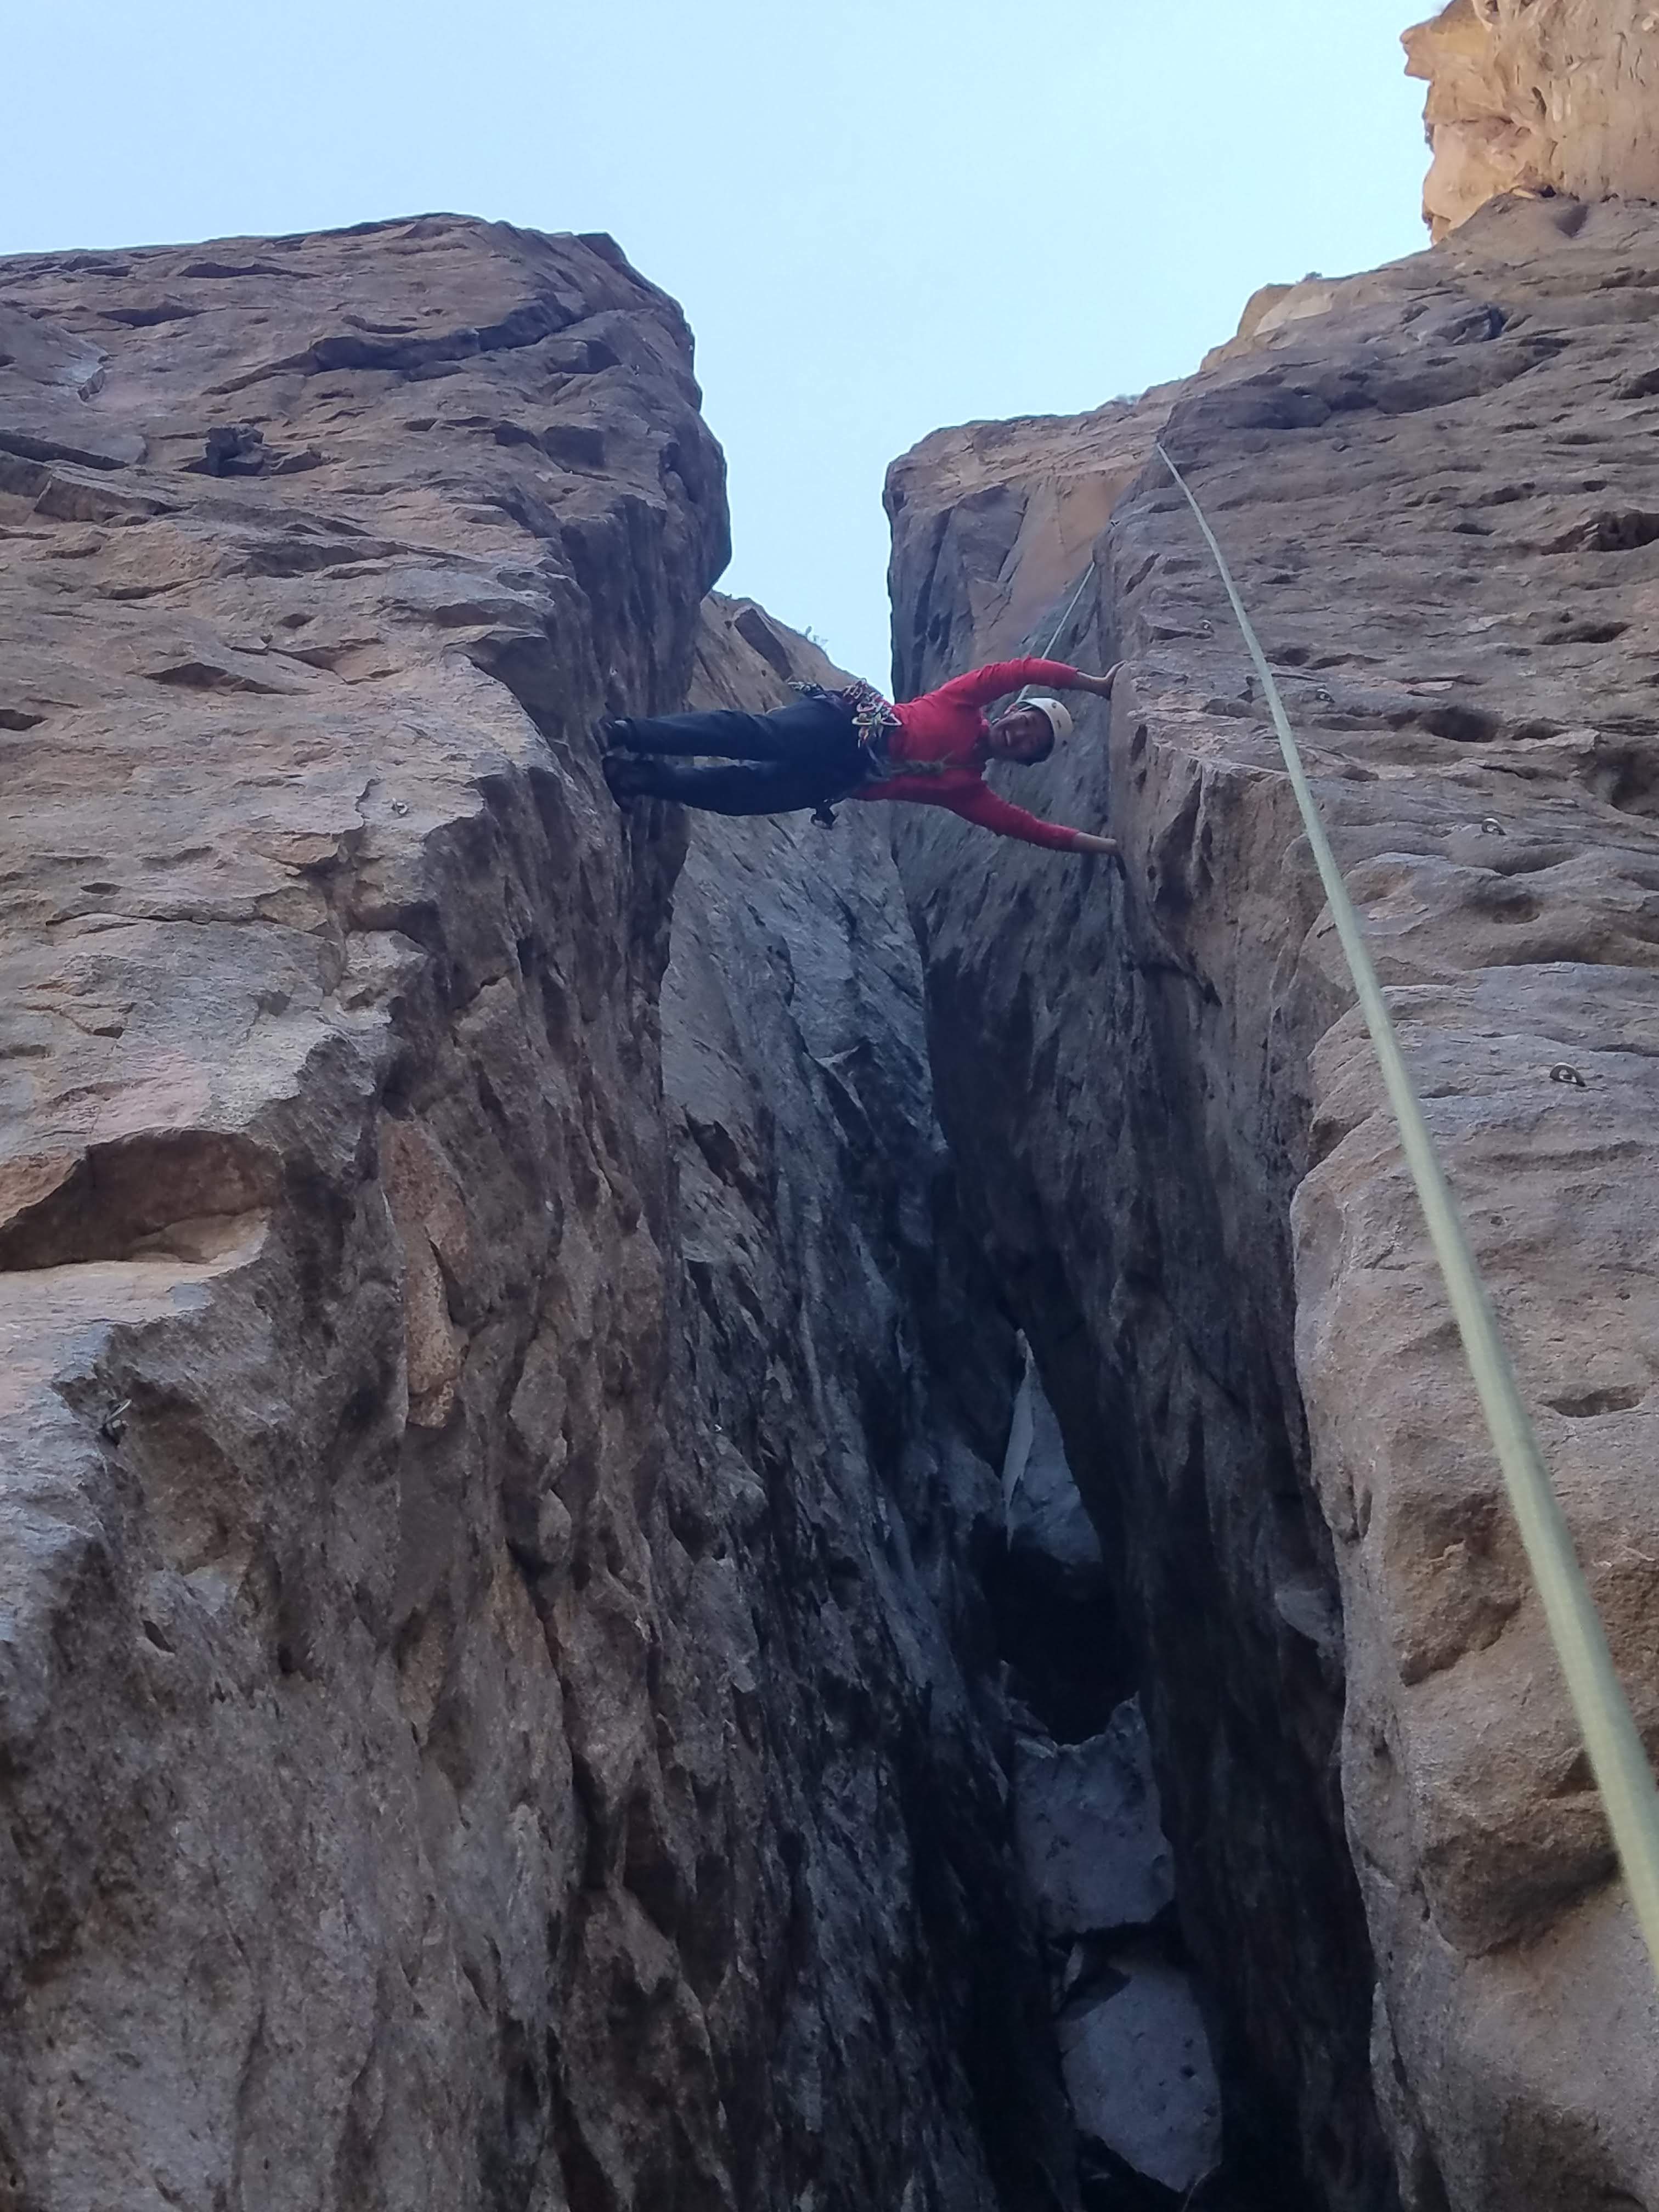 ... which I could barely span! I don't think this move is part of any real climb, but it came in handy when I needed to bail off the 5.11 arete on the left and jump over to the much nicer 5.8 arete on the right to save my quickdraws...